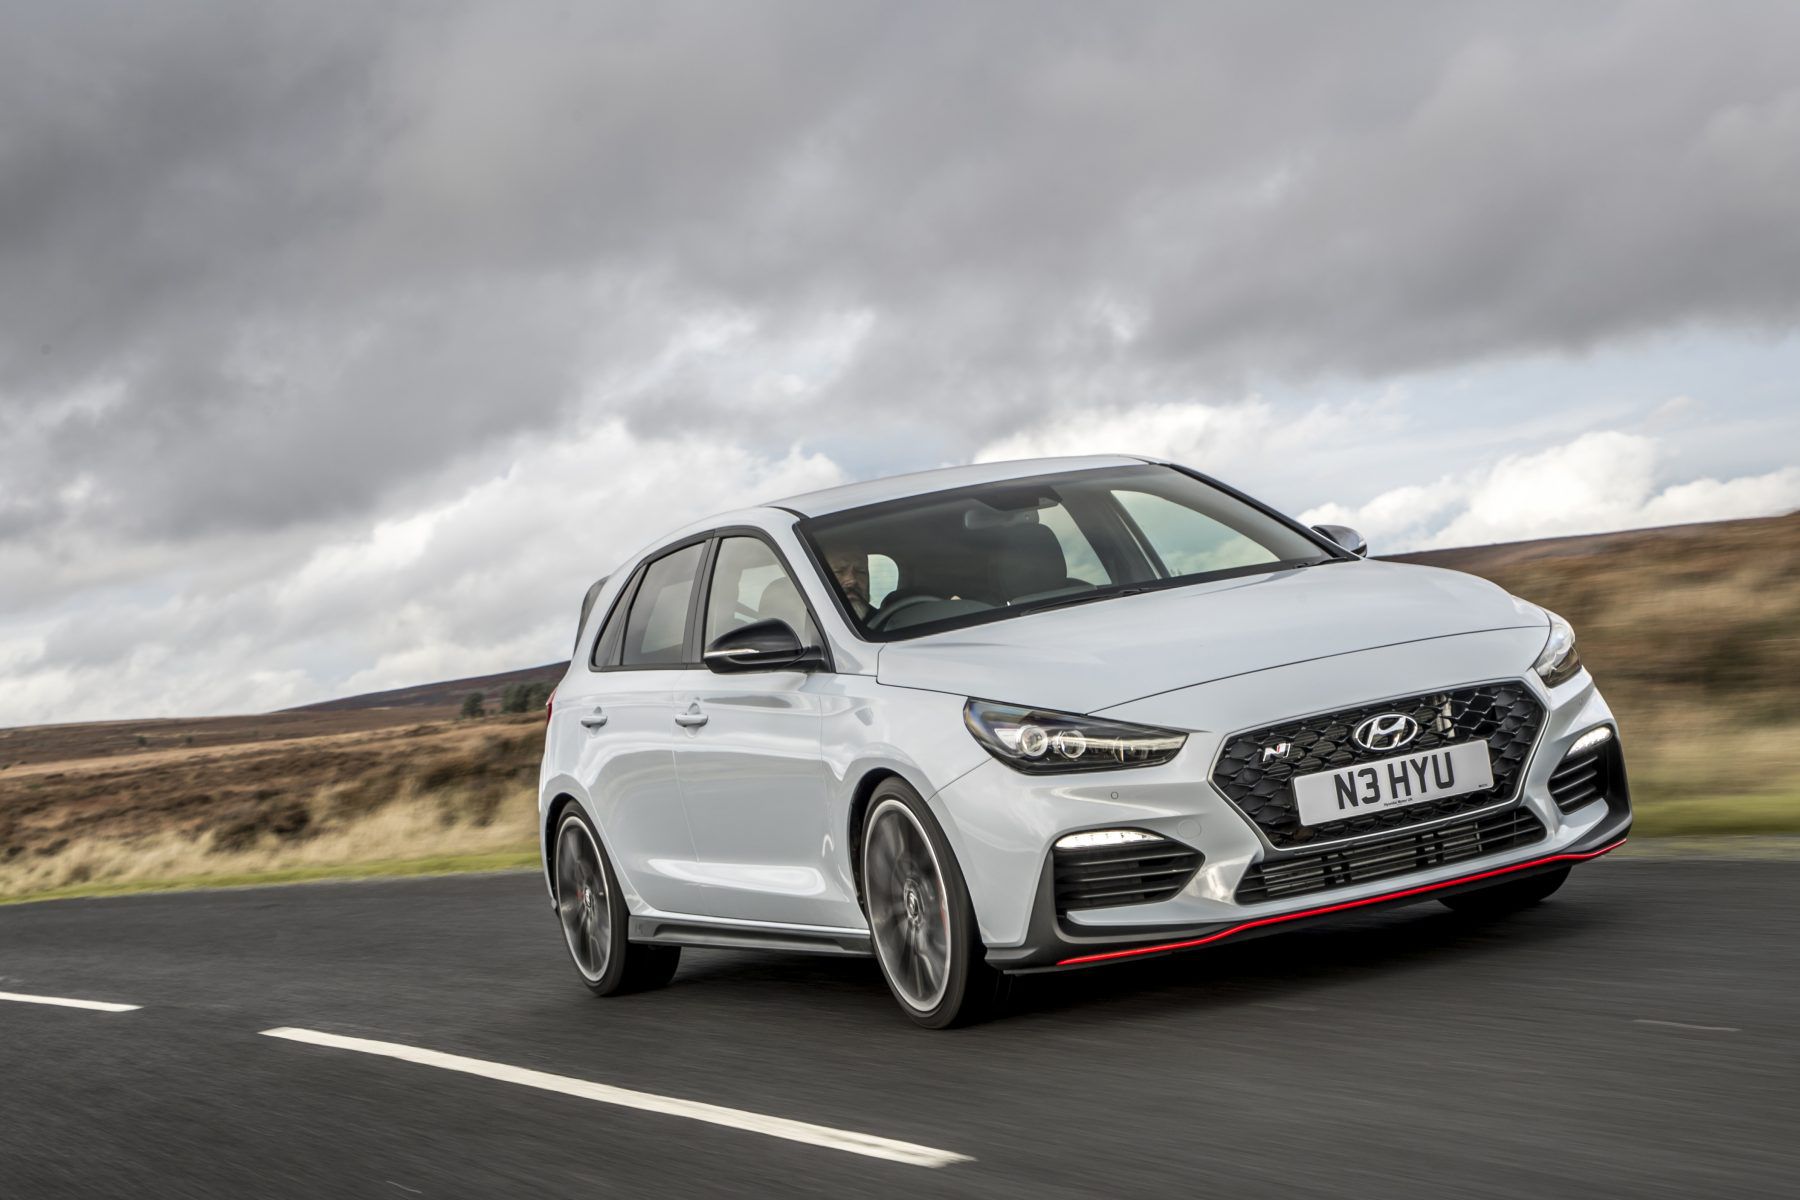 Front view of a Hyundai i30 N driving down the road